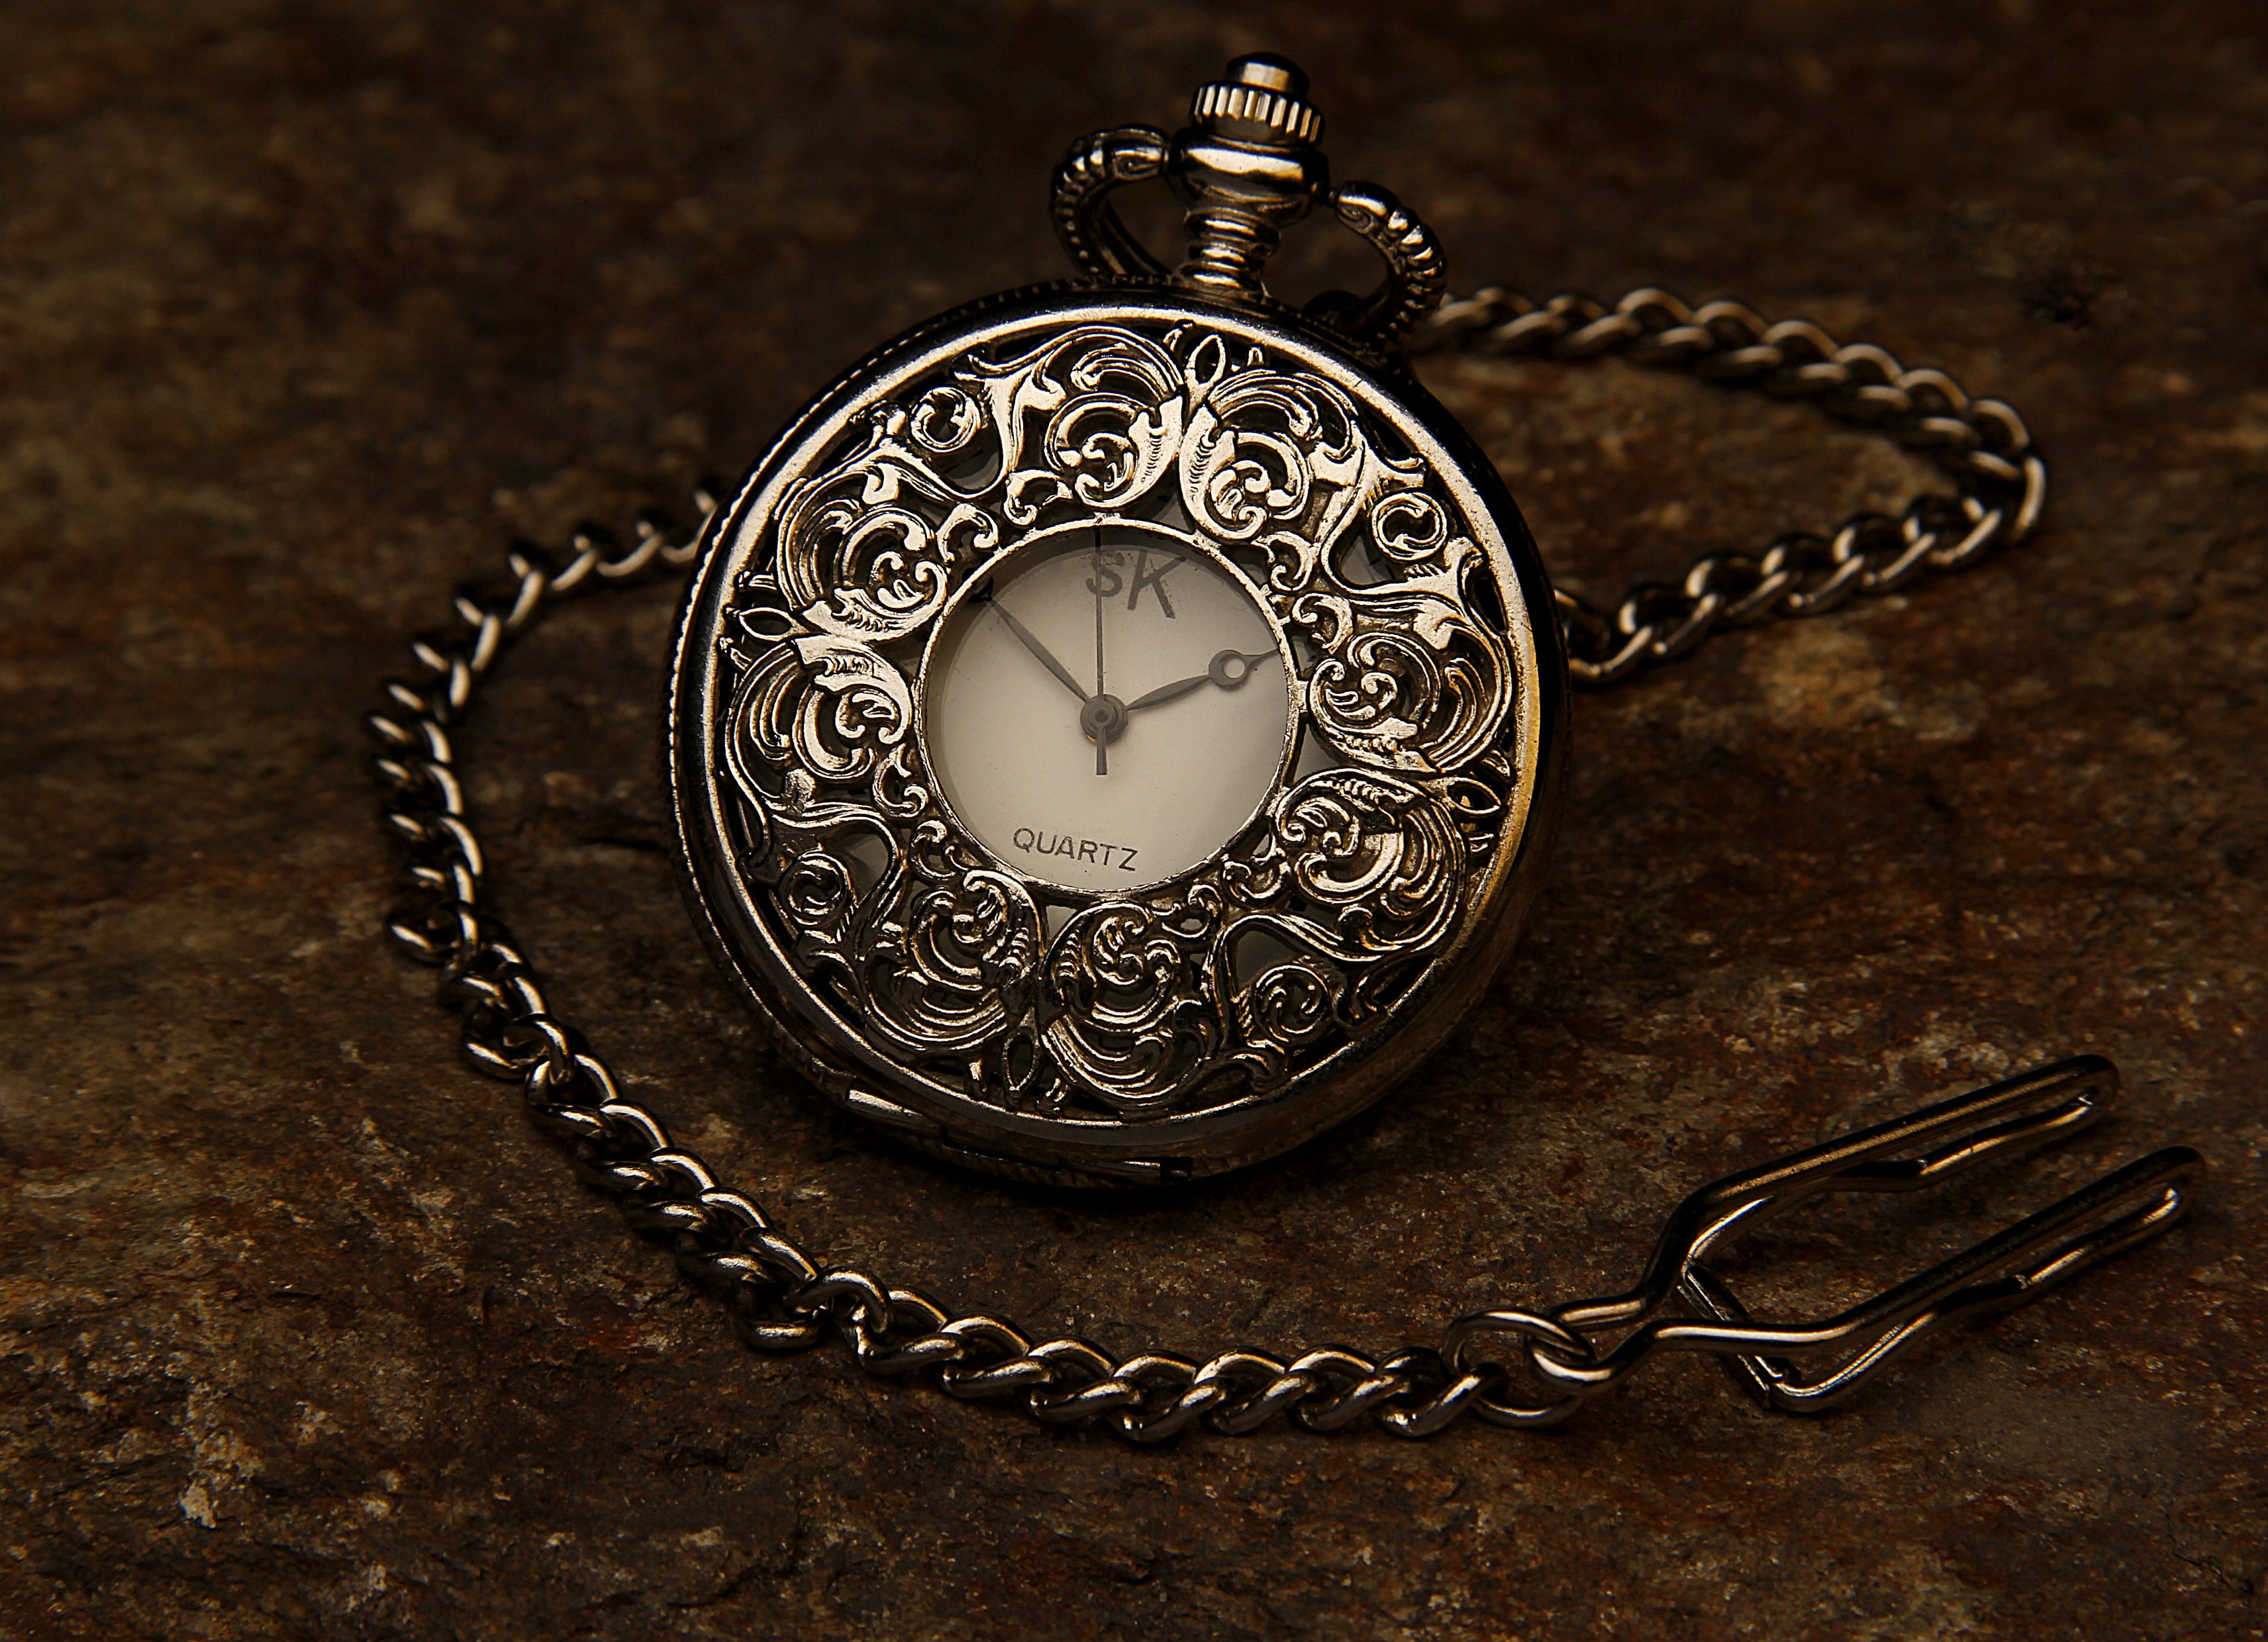 silver-colored pocket watch with link strap, jewel, chain, stone